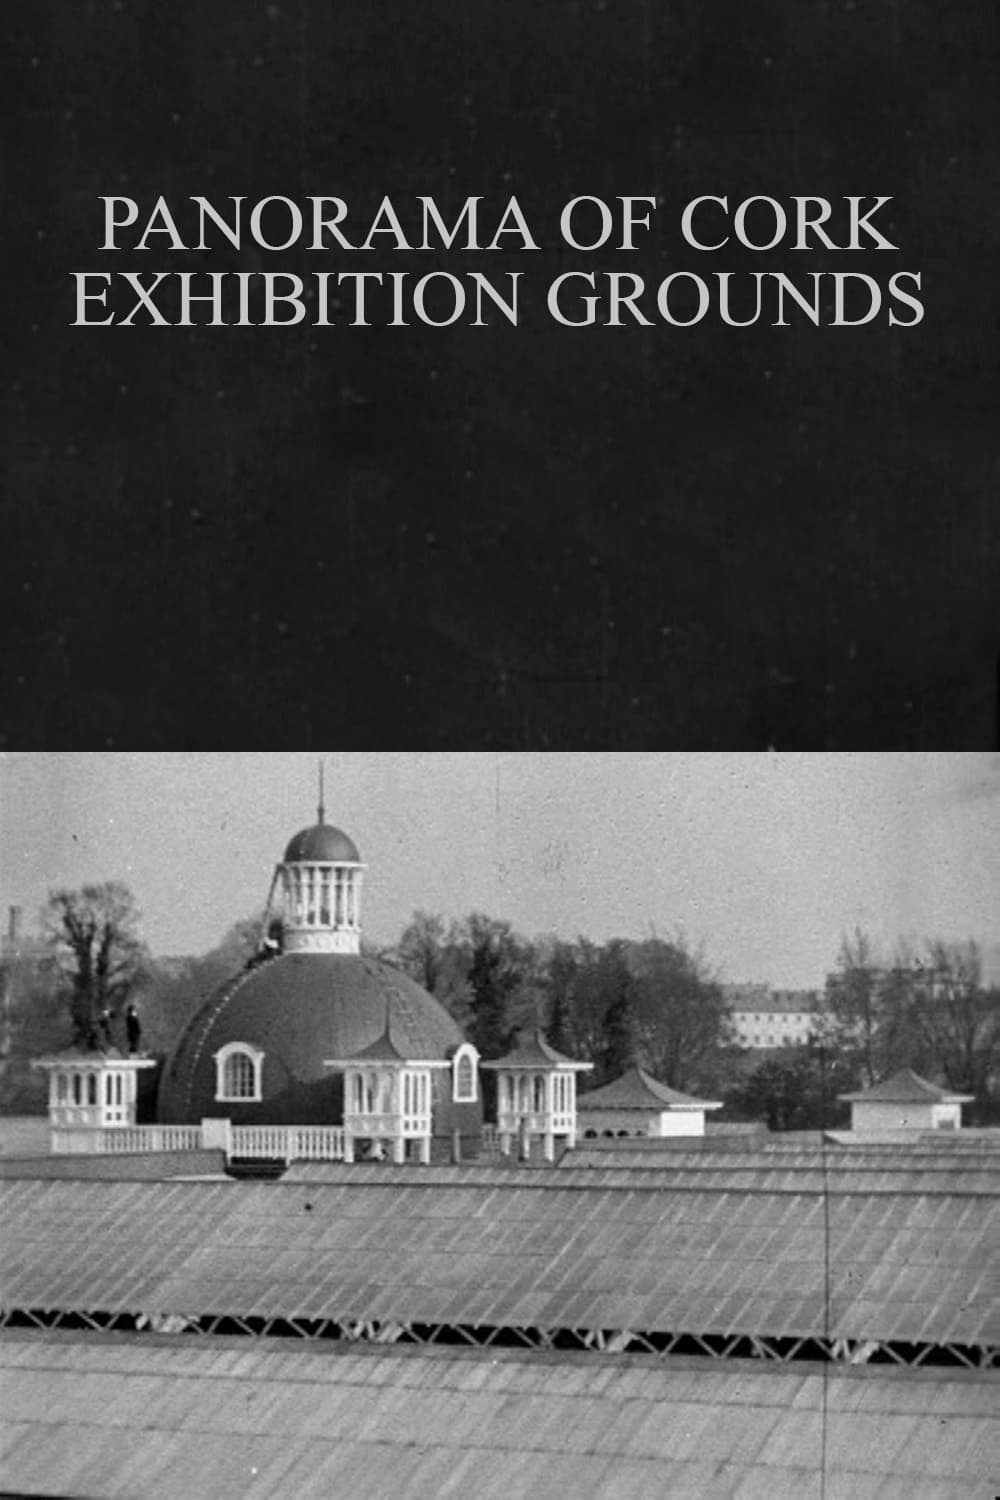 Panorama of Cork Exhibition Grounds